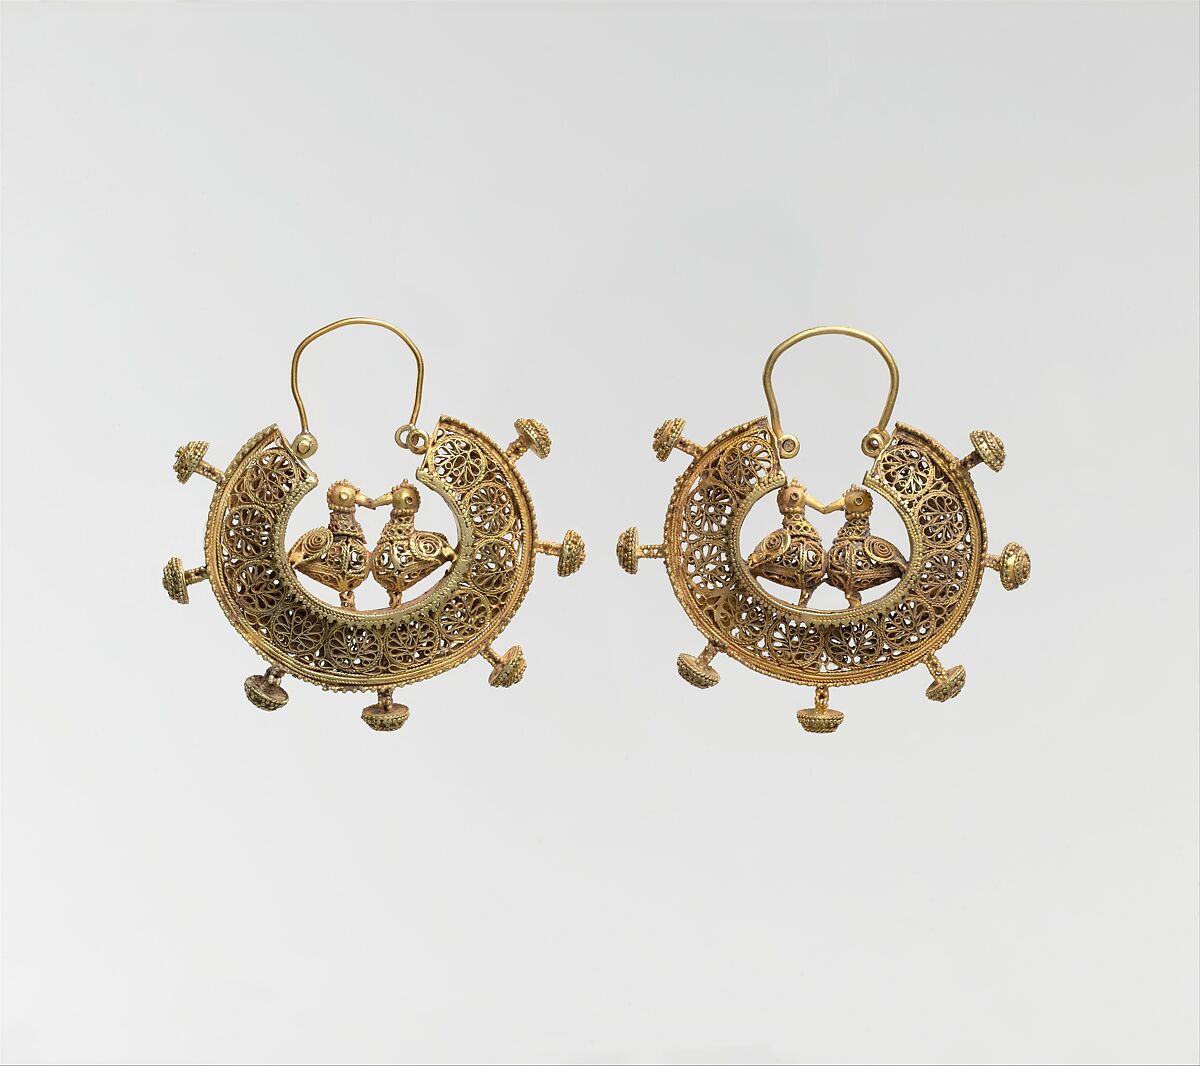 Pair of Earrings, Gold; filigree and granulation 